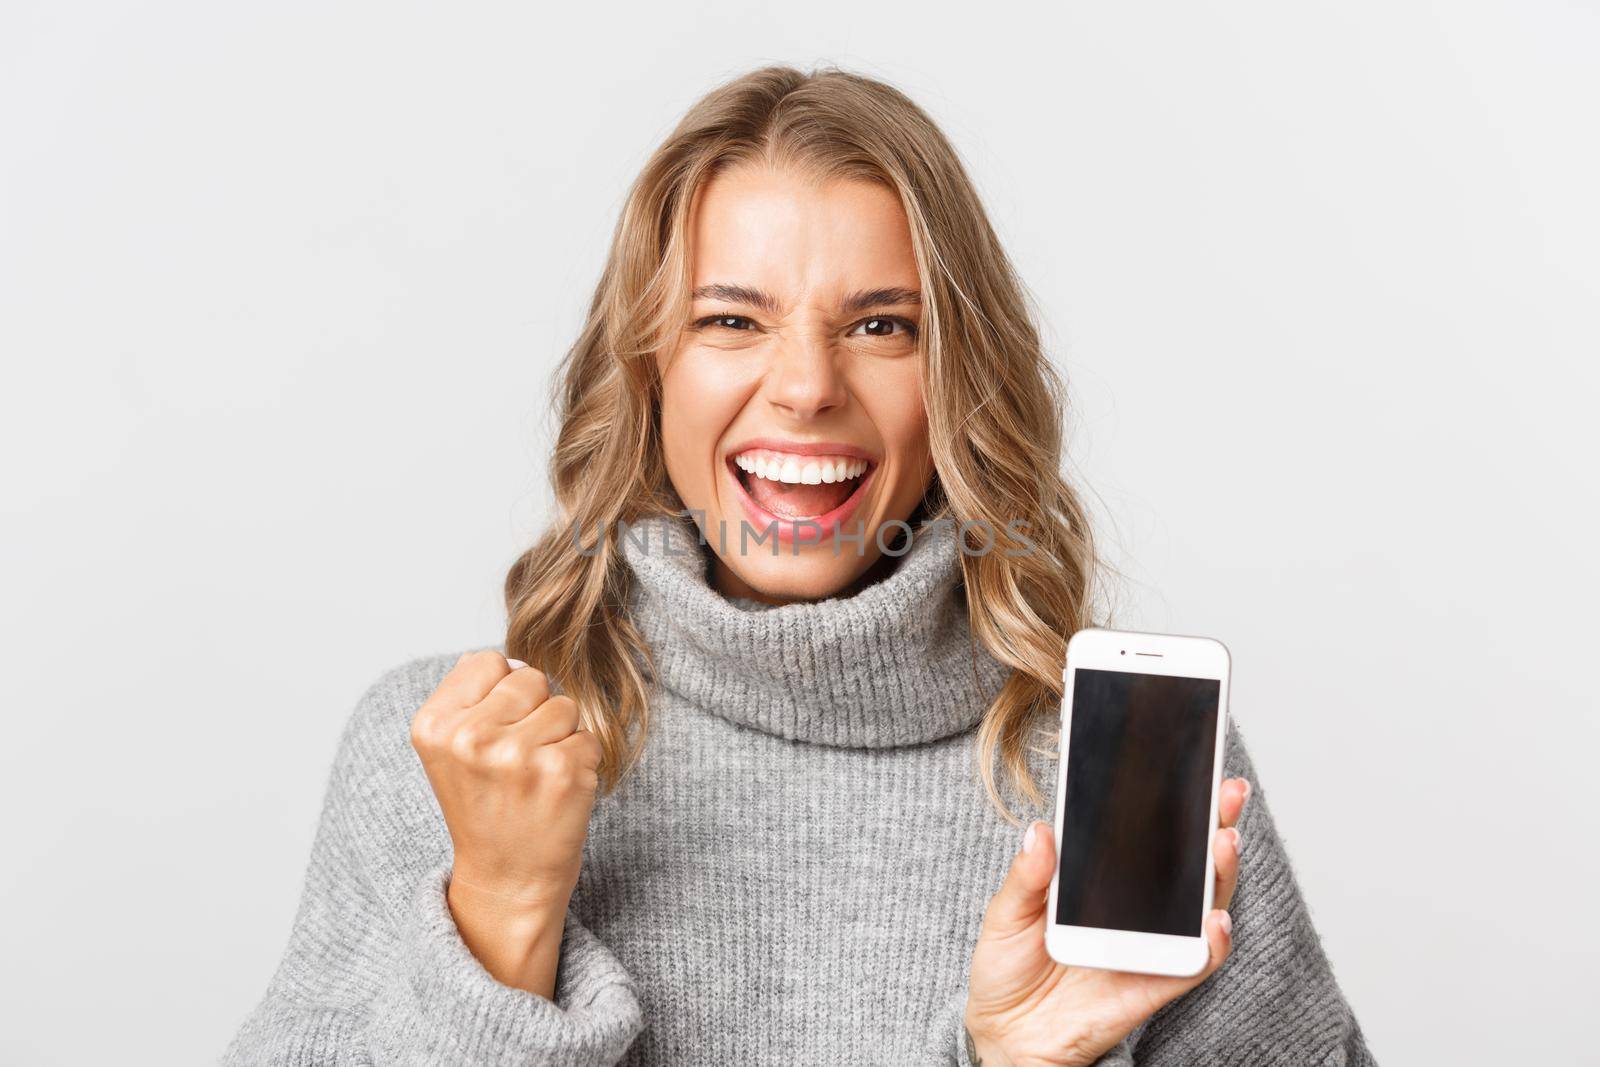 Close-up of successful blond girl, looking happy and triumphing, showing smartphone screen, standing over white background.